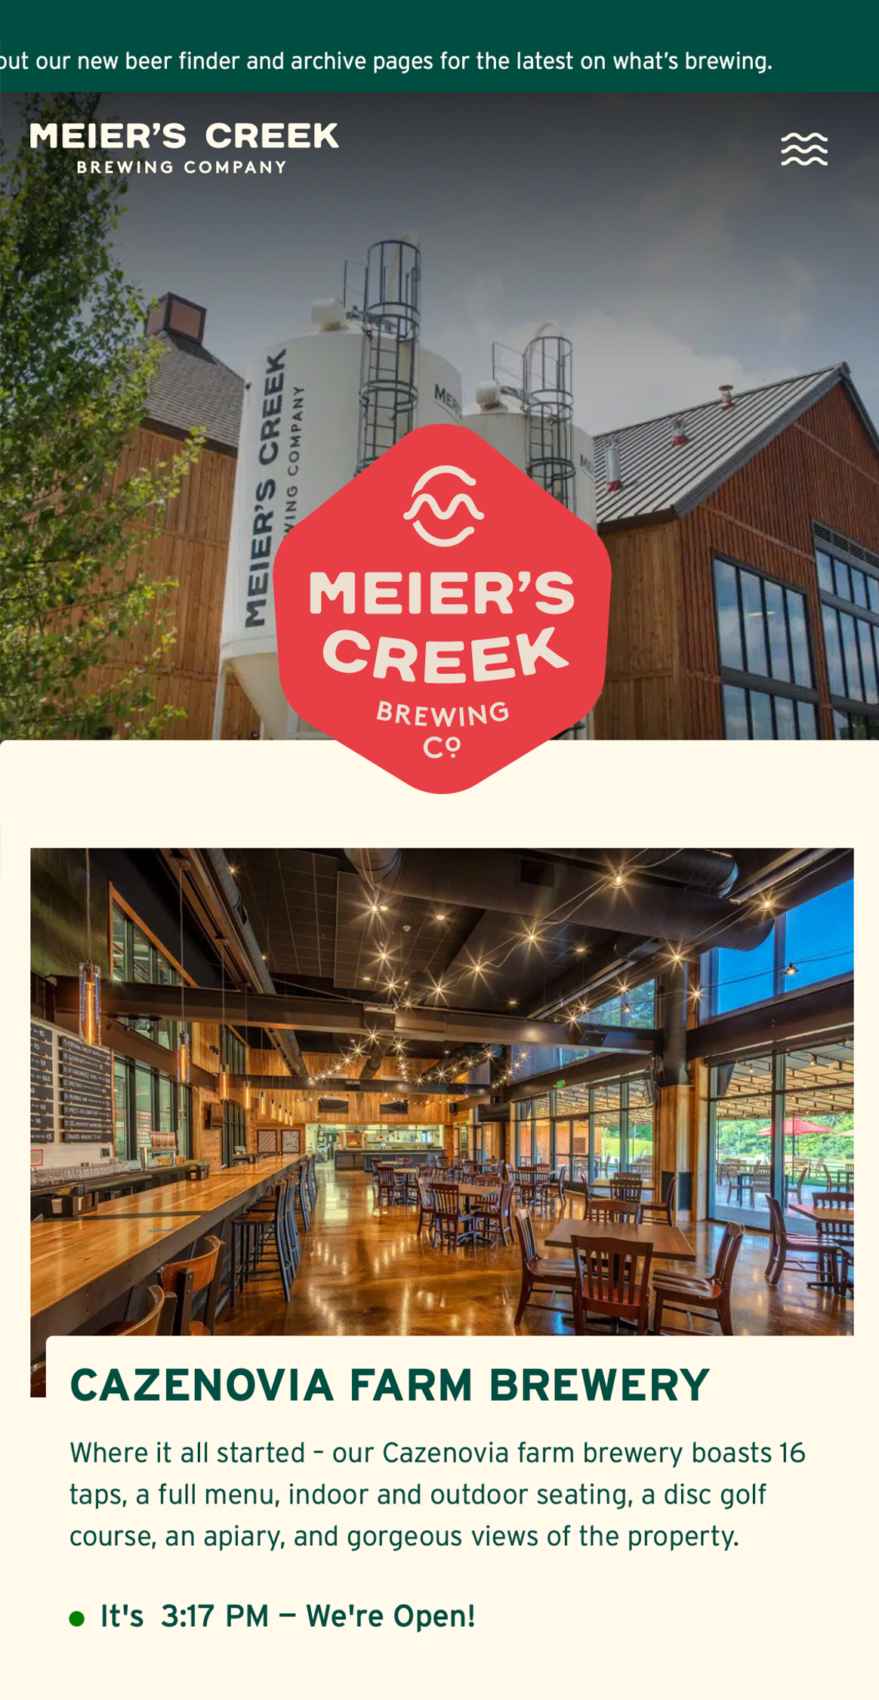 The Meier's Creek Brewing Company's home page shown on a mobile device sized layout